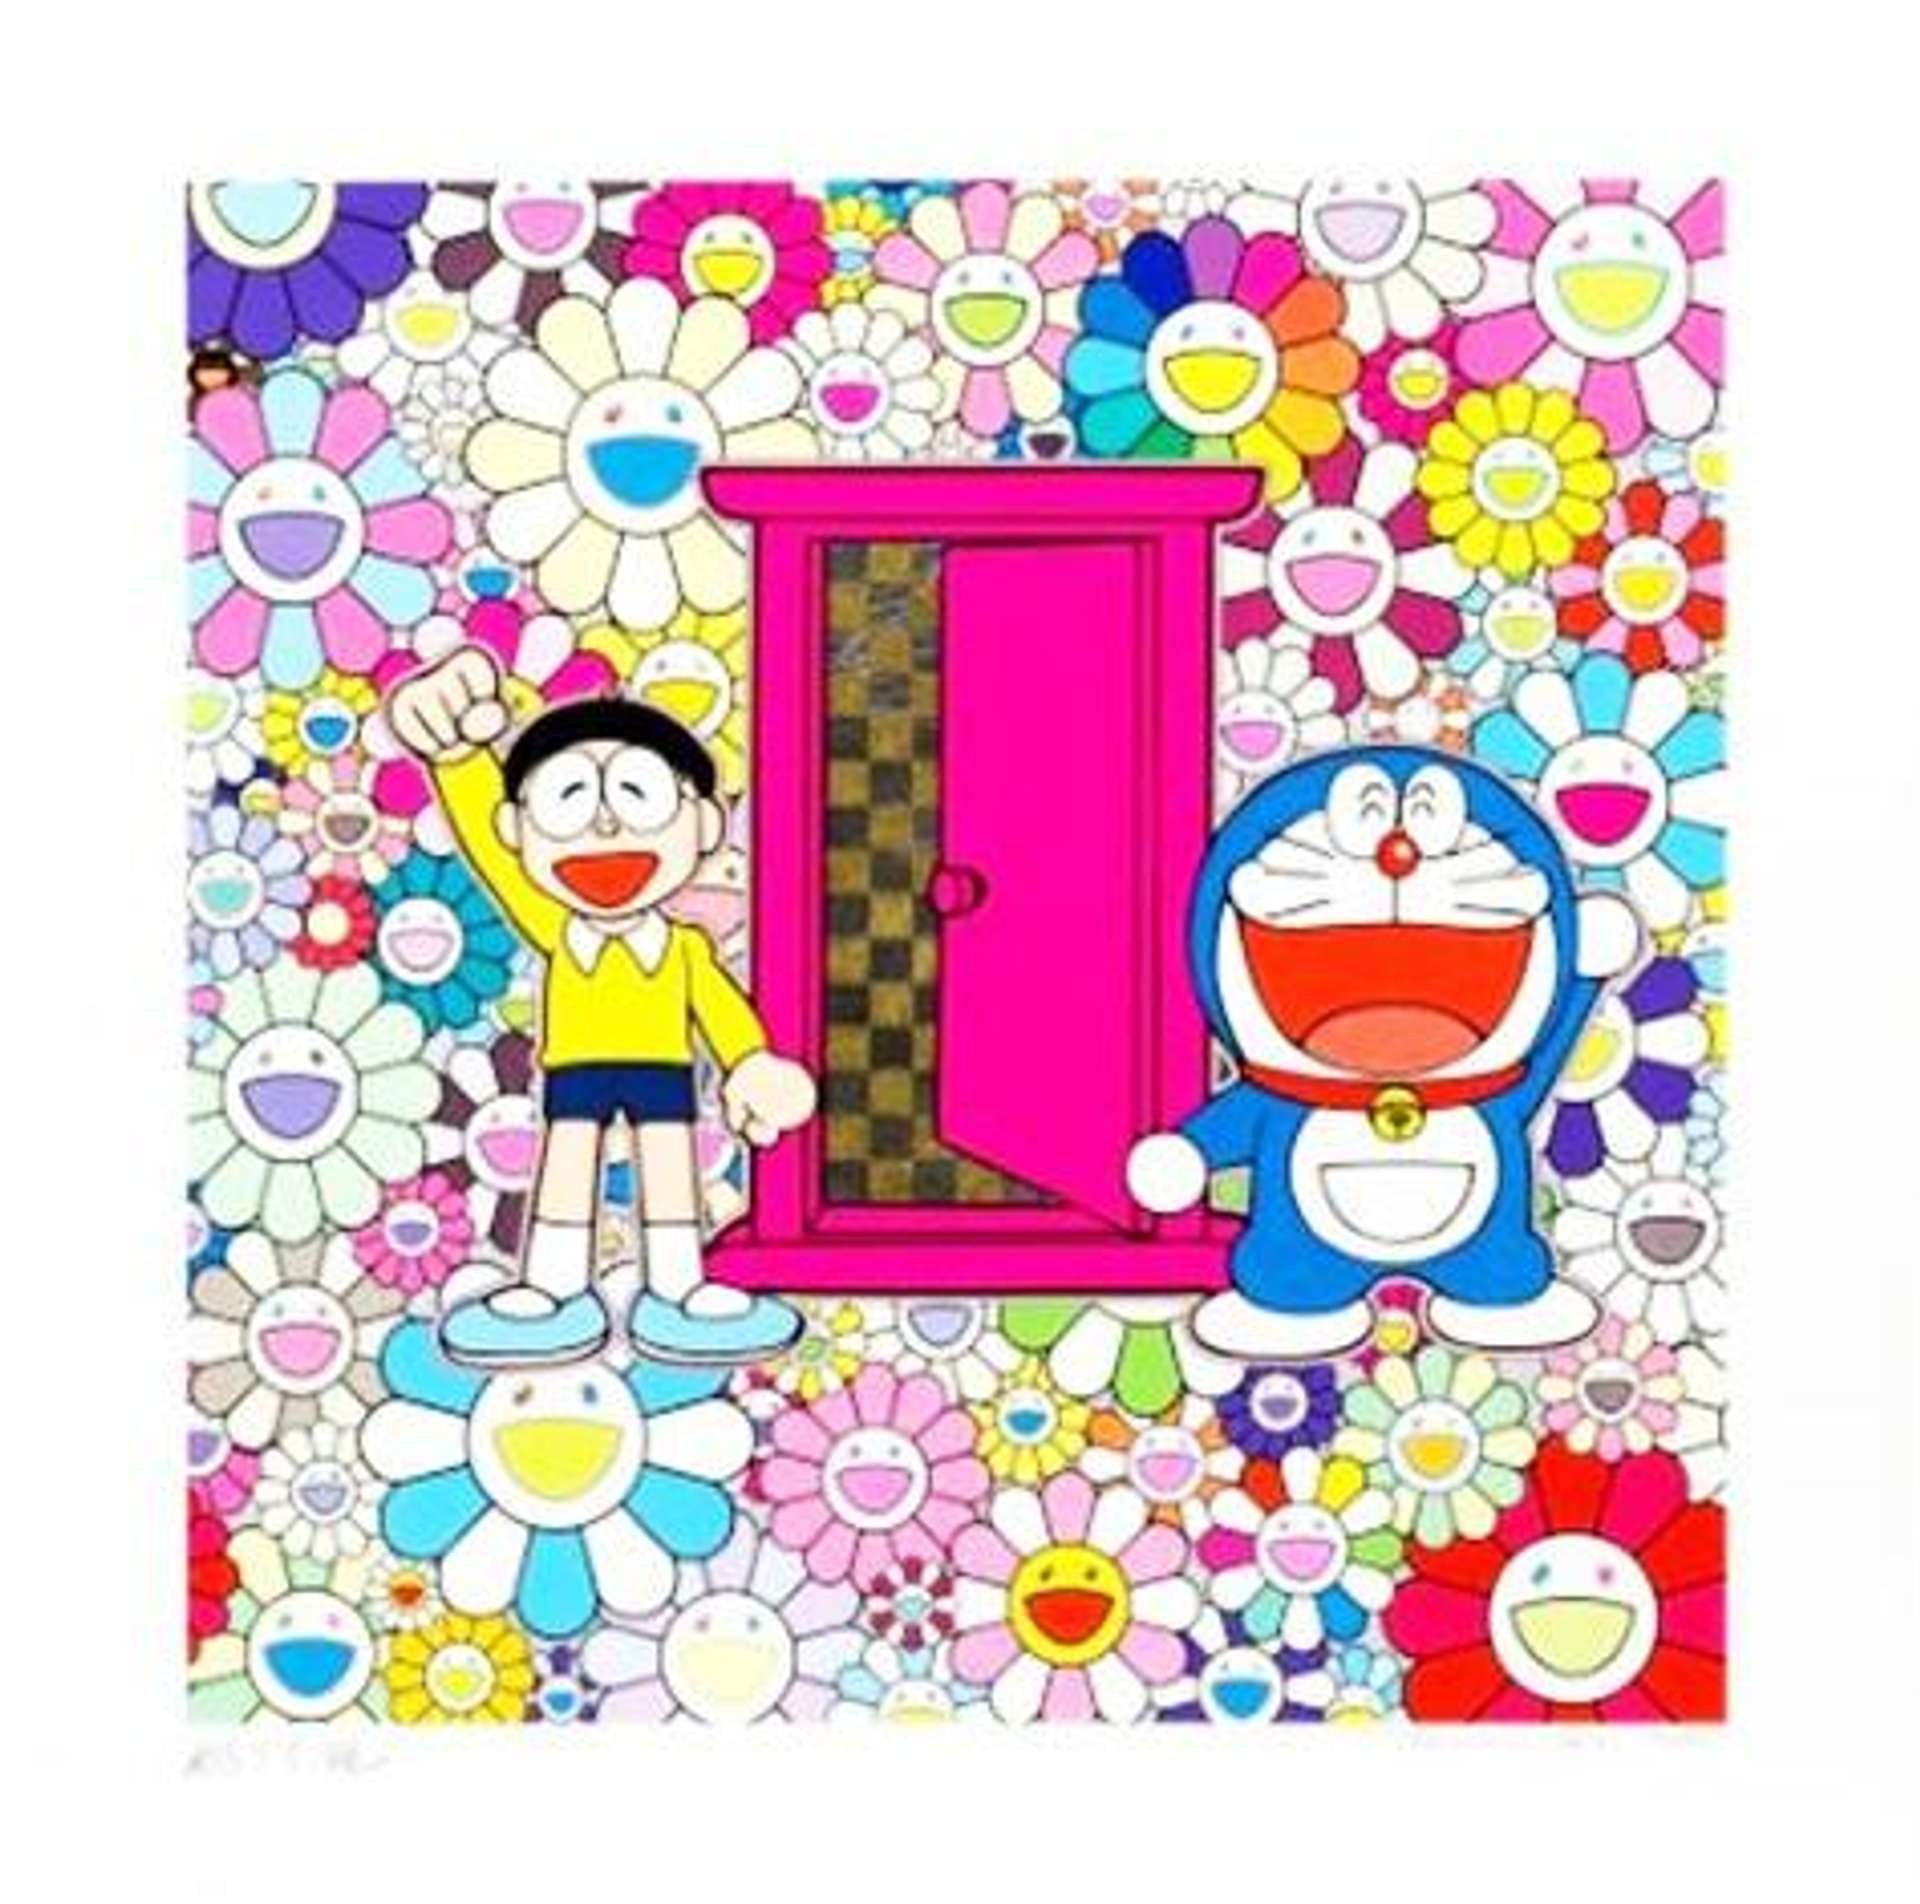 We Came To The Field Of Flowers Through Anywhere Door - Signed Print by Takashi Murakami 2019 - MyArtBroker